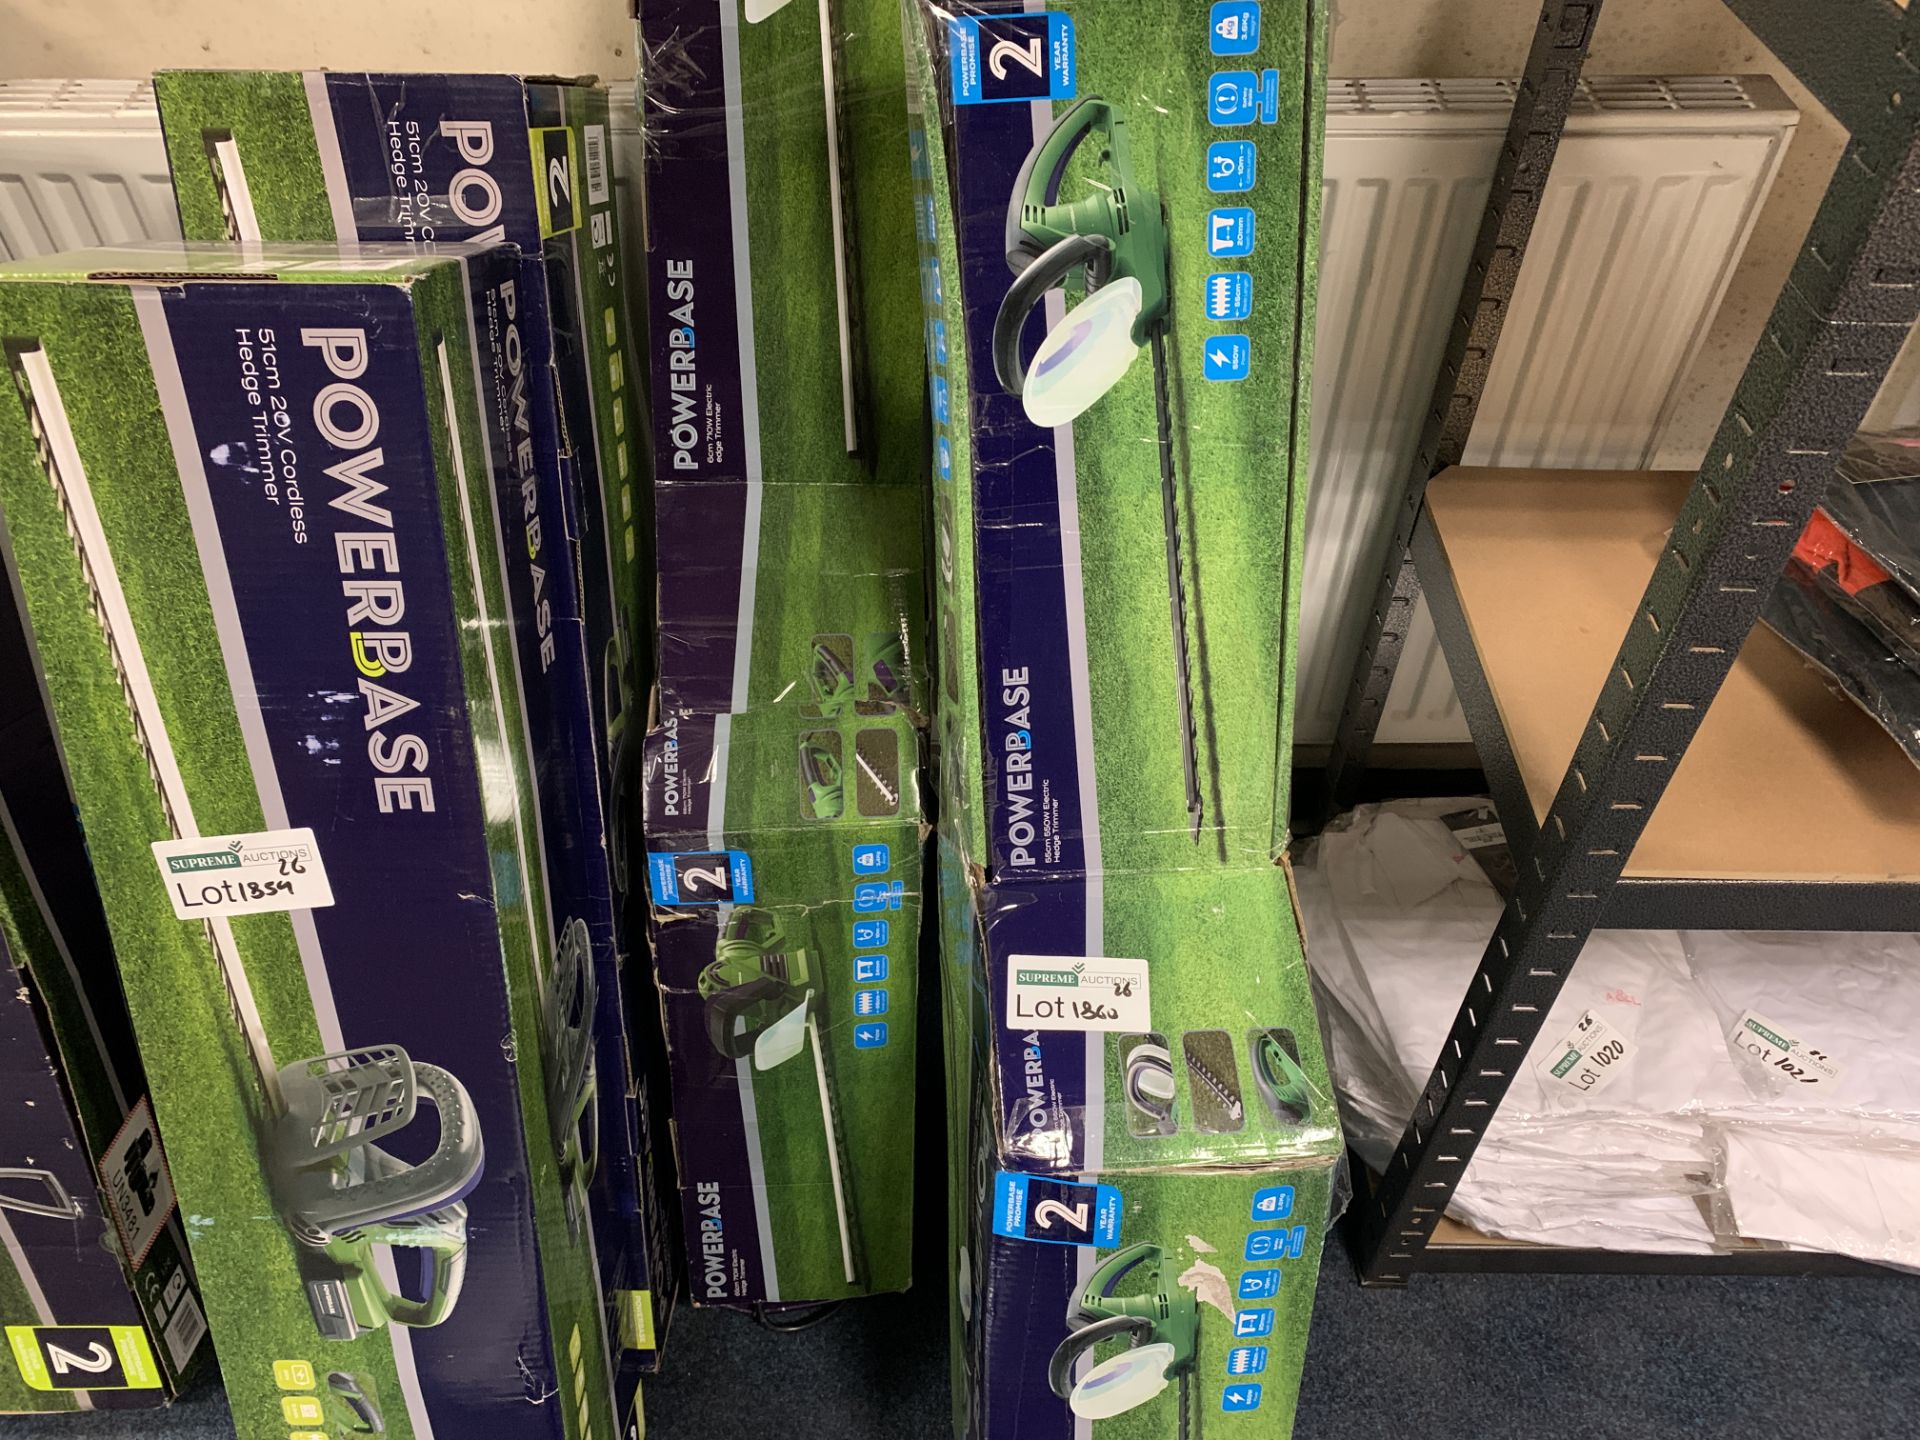 3 X POWERBASE 66CM 710W ELECTRIC HEDGE TRIMMERS (UNCHECKED, UNTESTED) EBR